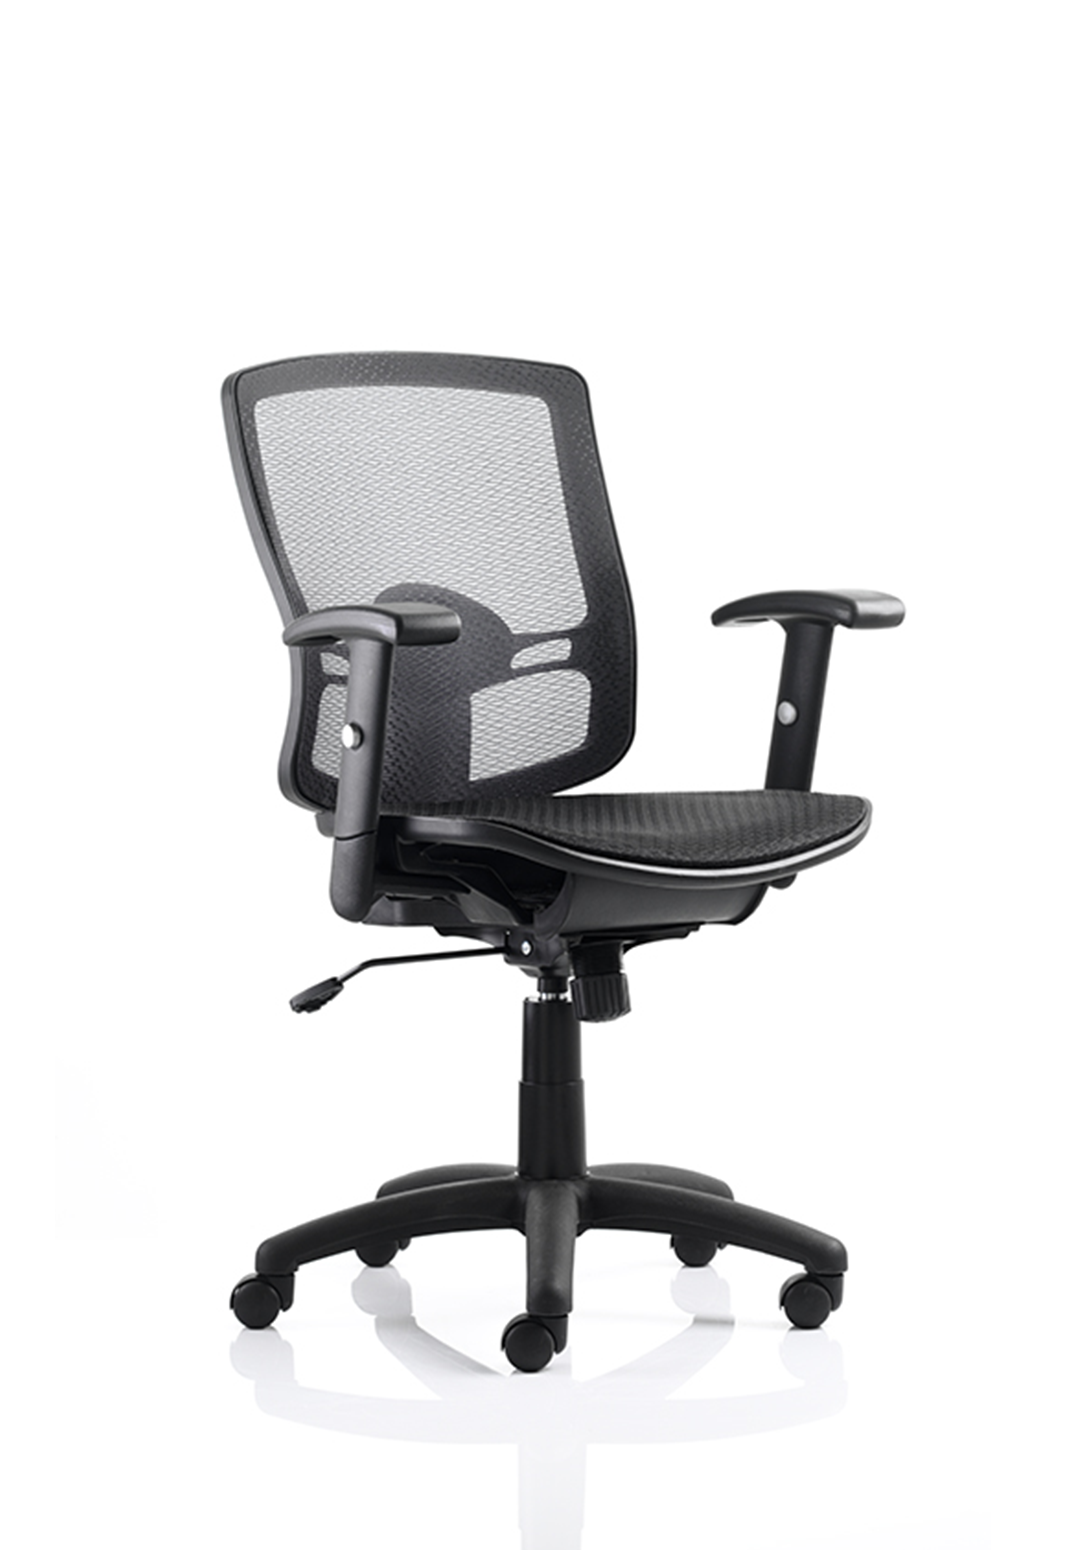 Palma Home Office Chair | Operator Chair | Home Office Furniture | Ergonomic Furniture | Home Office Furniture | Swivel Chair | Mesh Office Chair | Breathable Office Chair